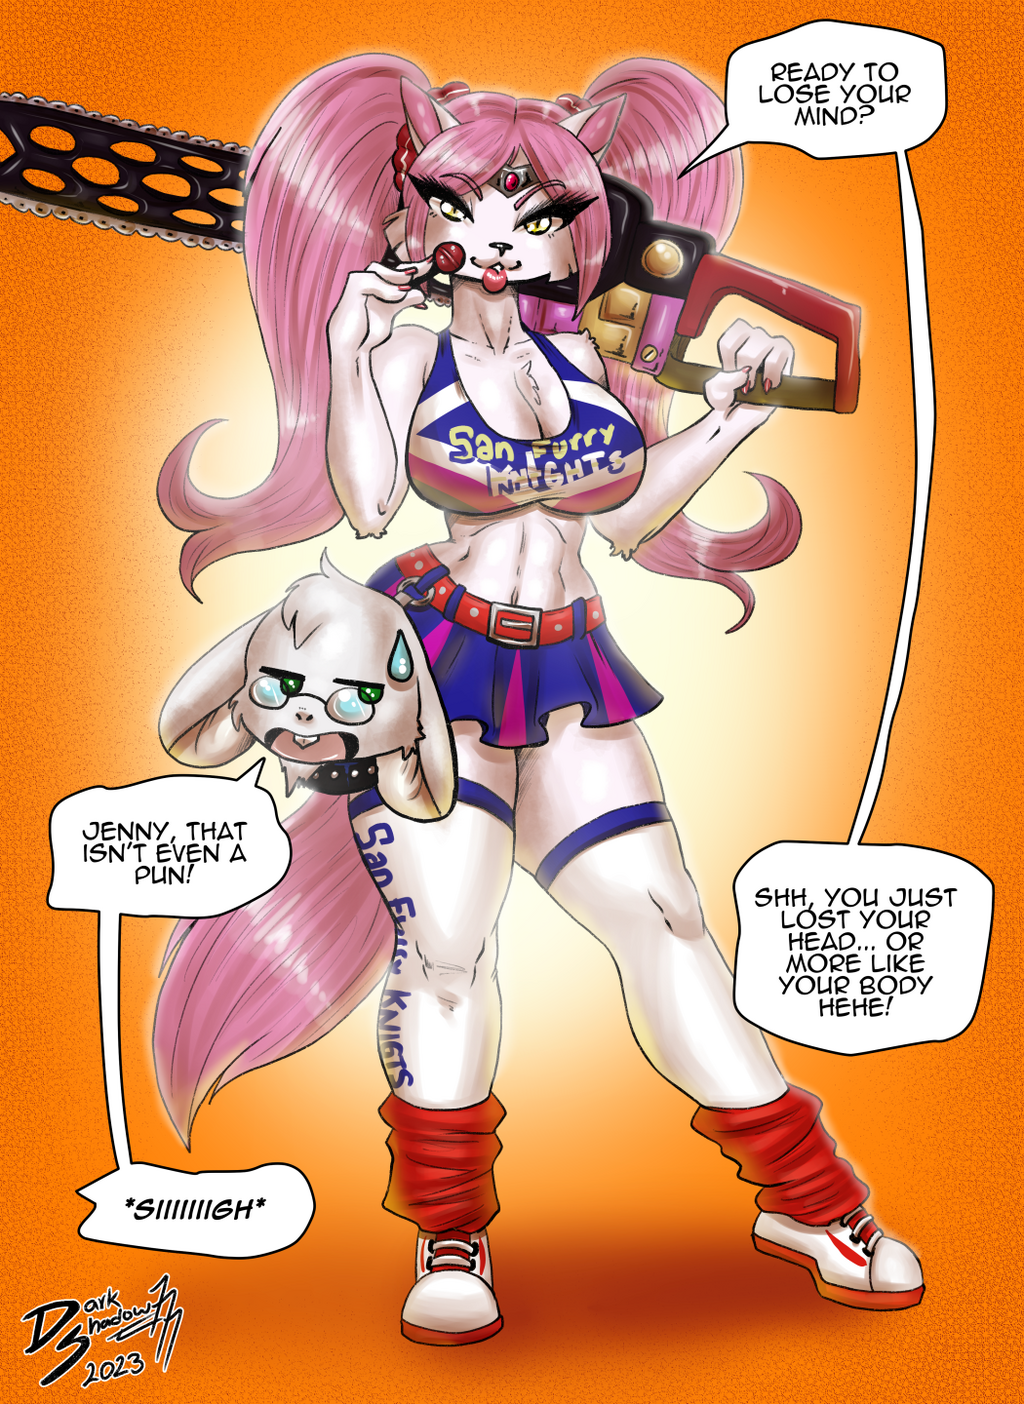 Most recent image: Furrypop Chainsaw